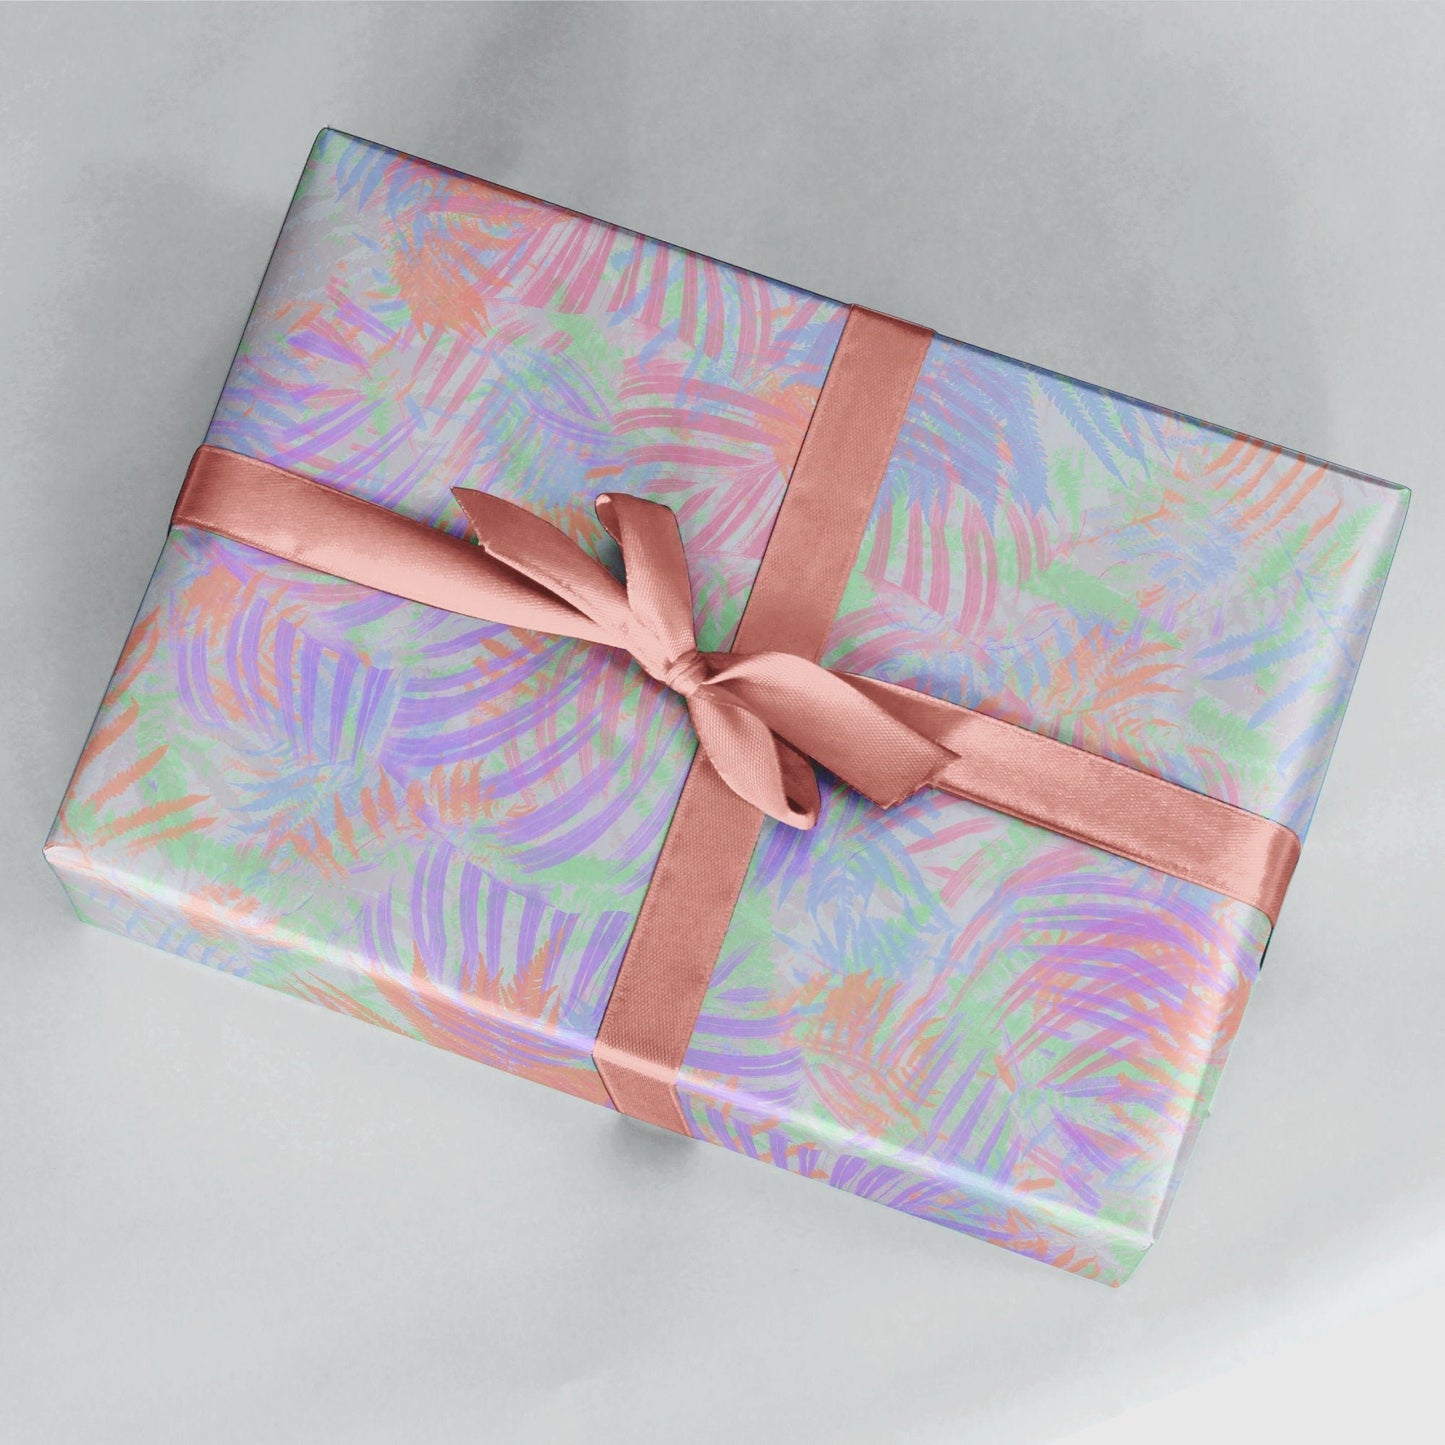 Neon Tropical Wrapping Paper The Design Craft